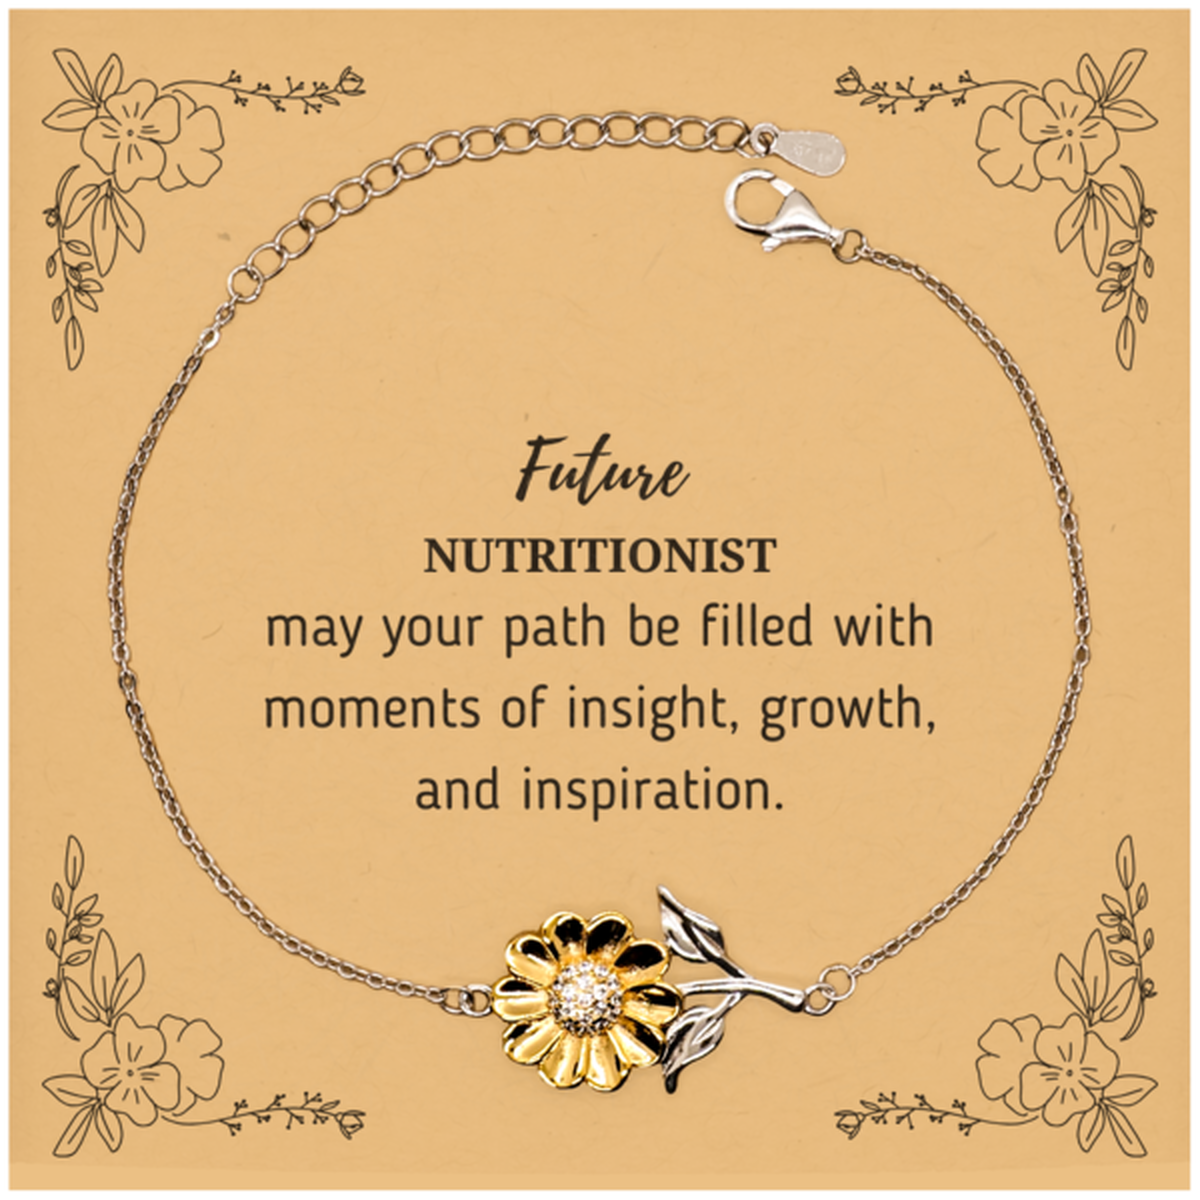 Future Nutritionist Gifts, May your path be filled with moments of insight, Graduation Gifts for New Nutritionist, Christmas Unique Sunflower Bracelet For Men, Women, Friends